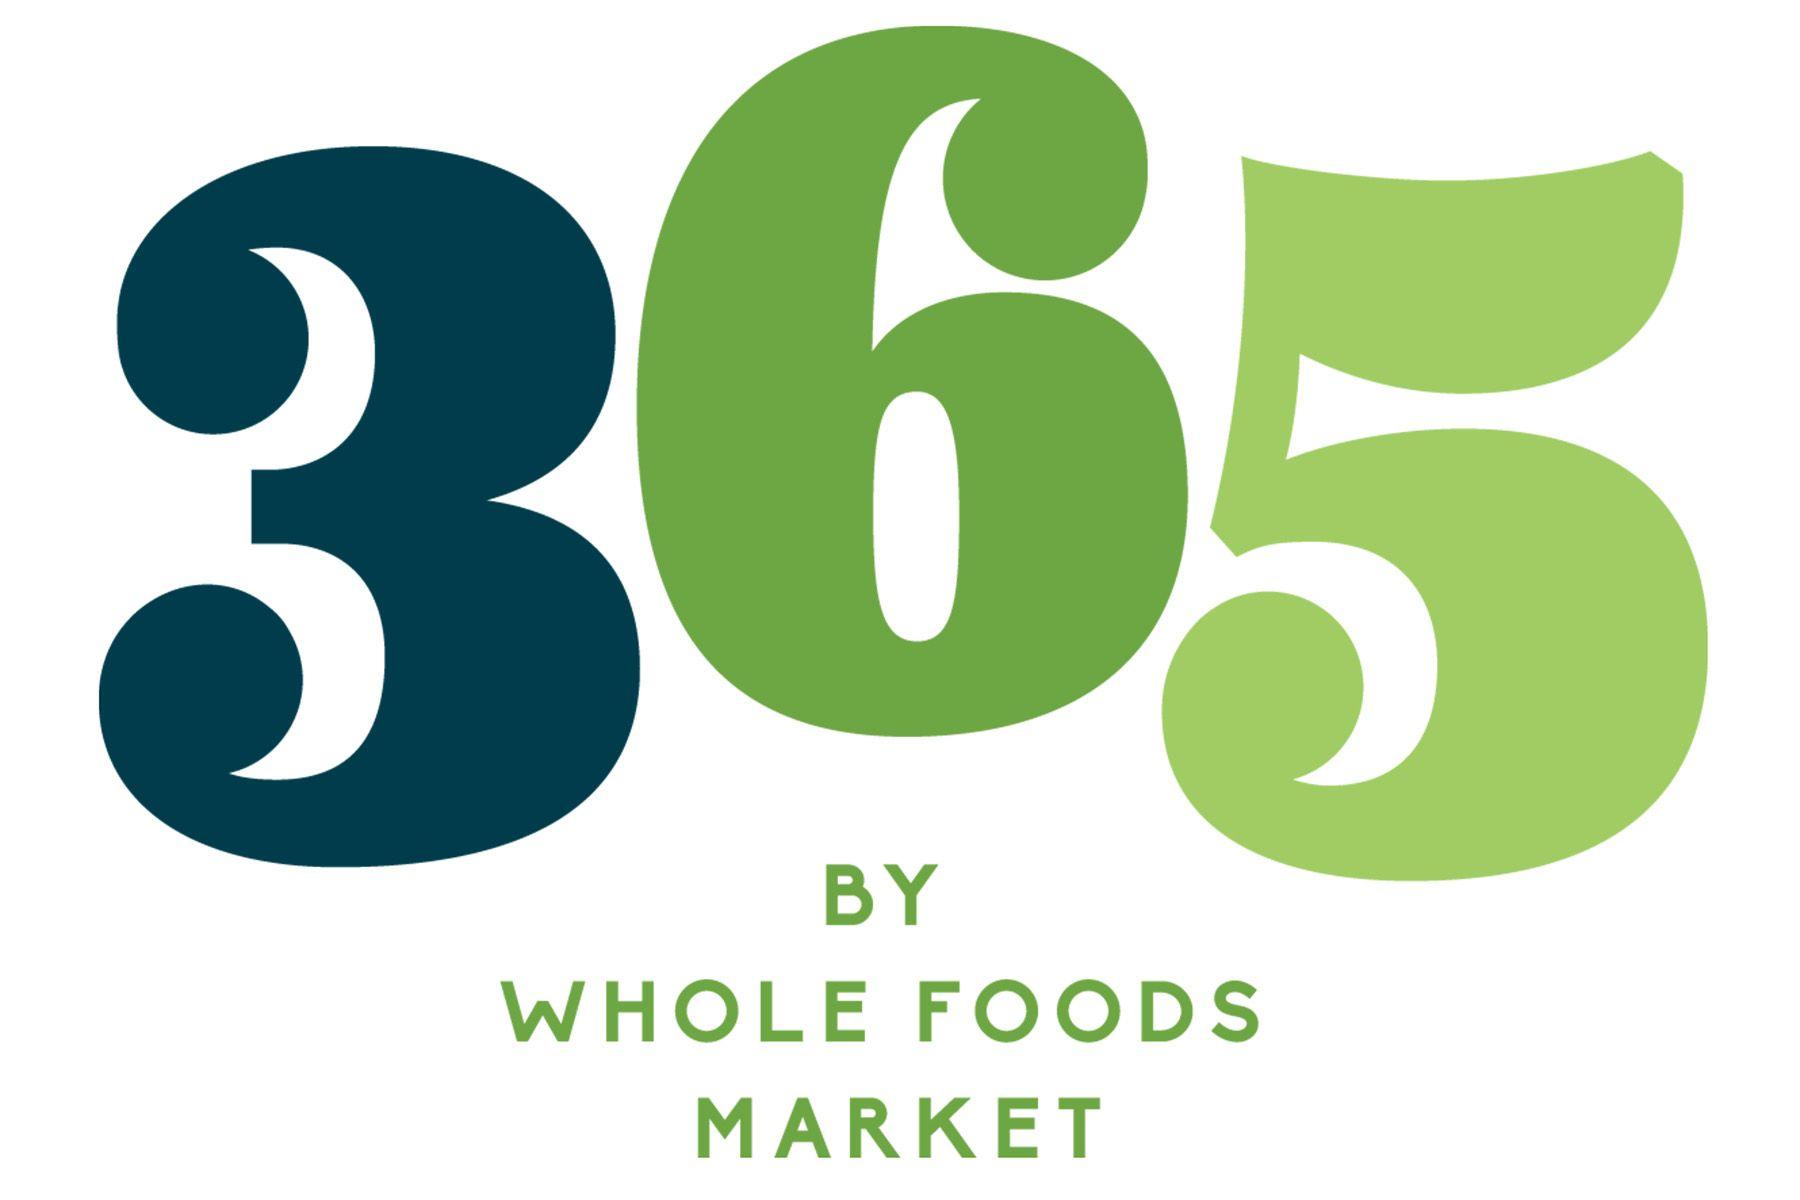 Food Market Logo - Whole Foods to call new lower-priced chain 365 after its private ...